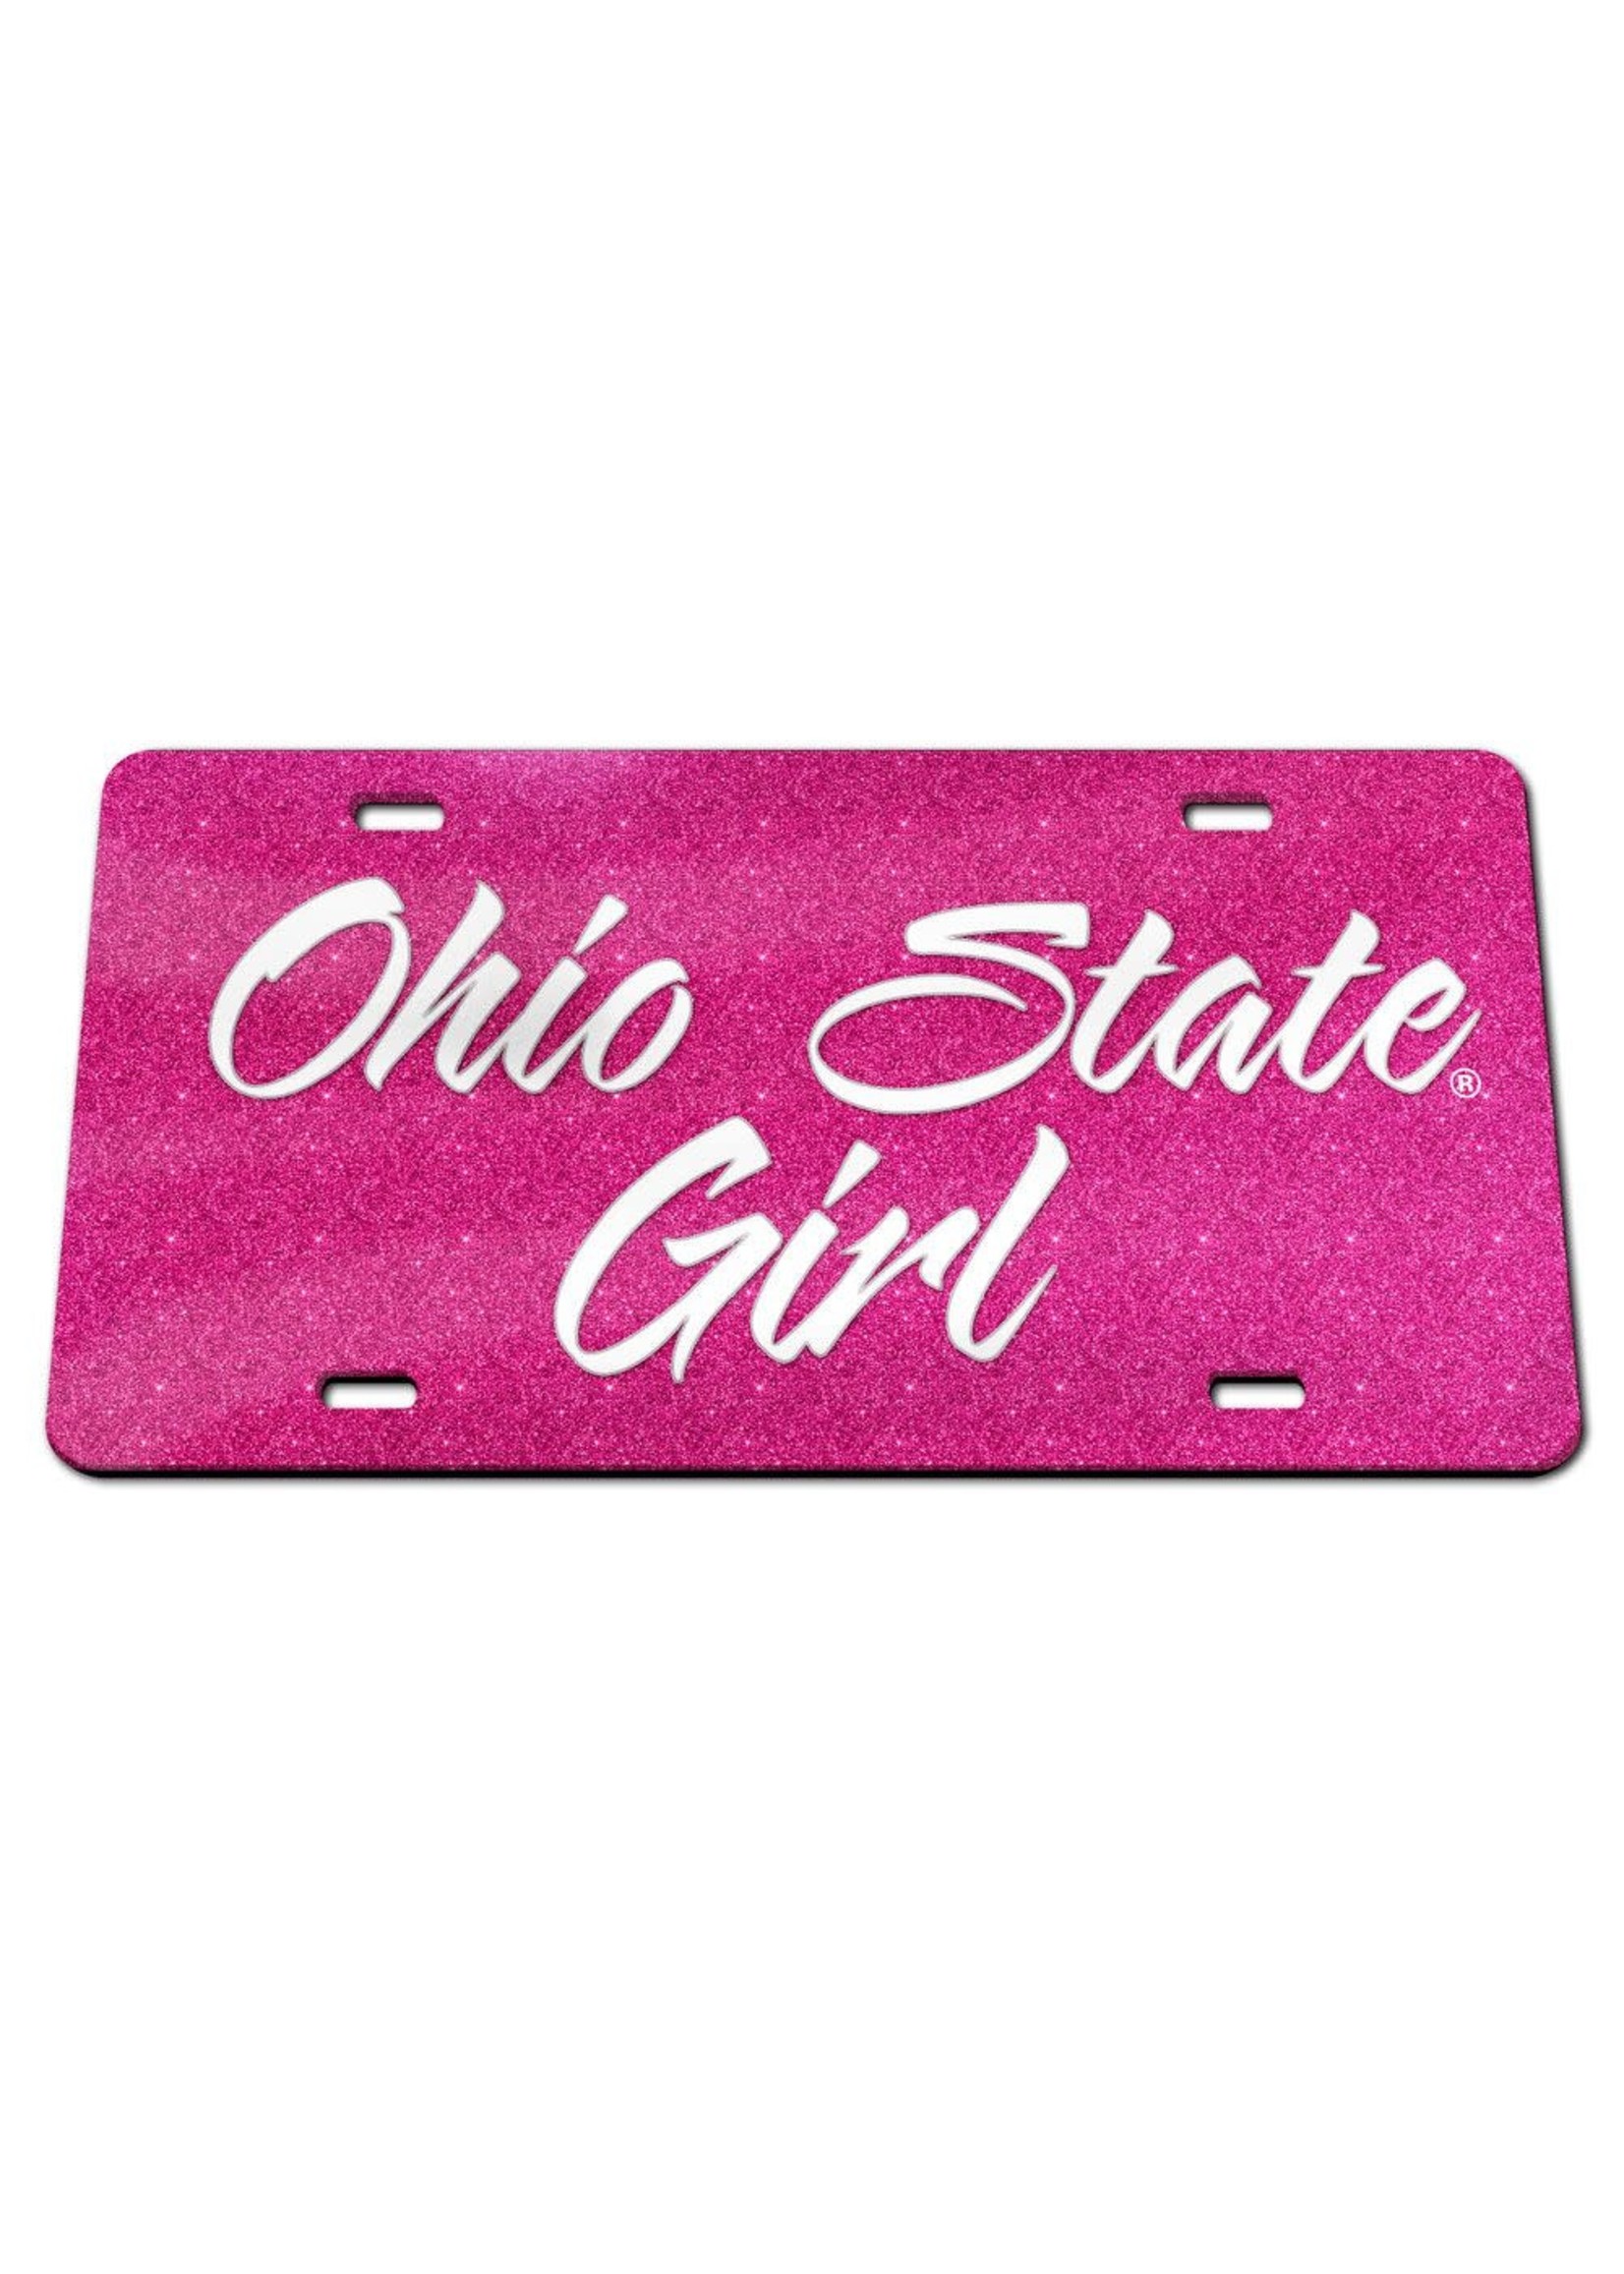 Wincraft OHIO STATE GIRL ACRYLIC LICENSE PLATE